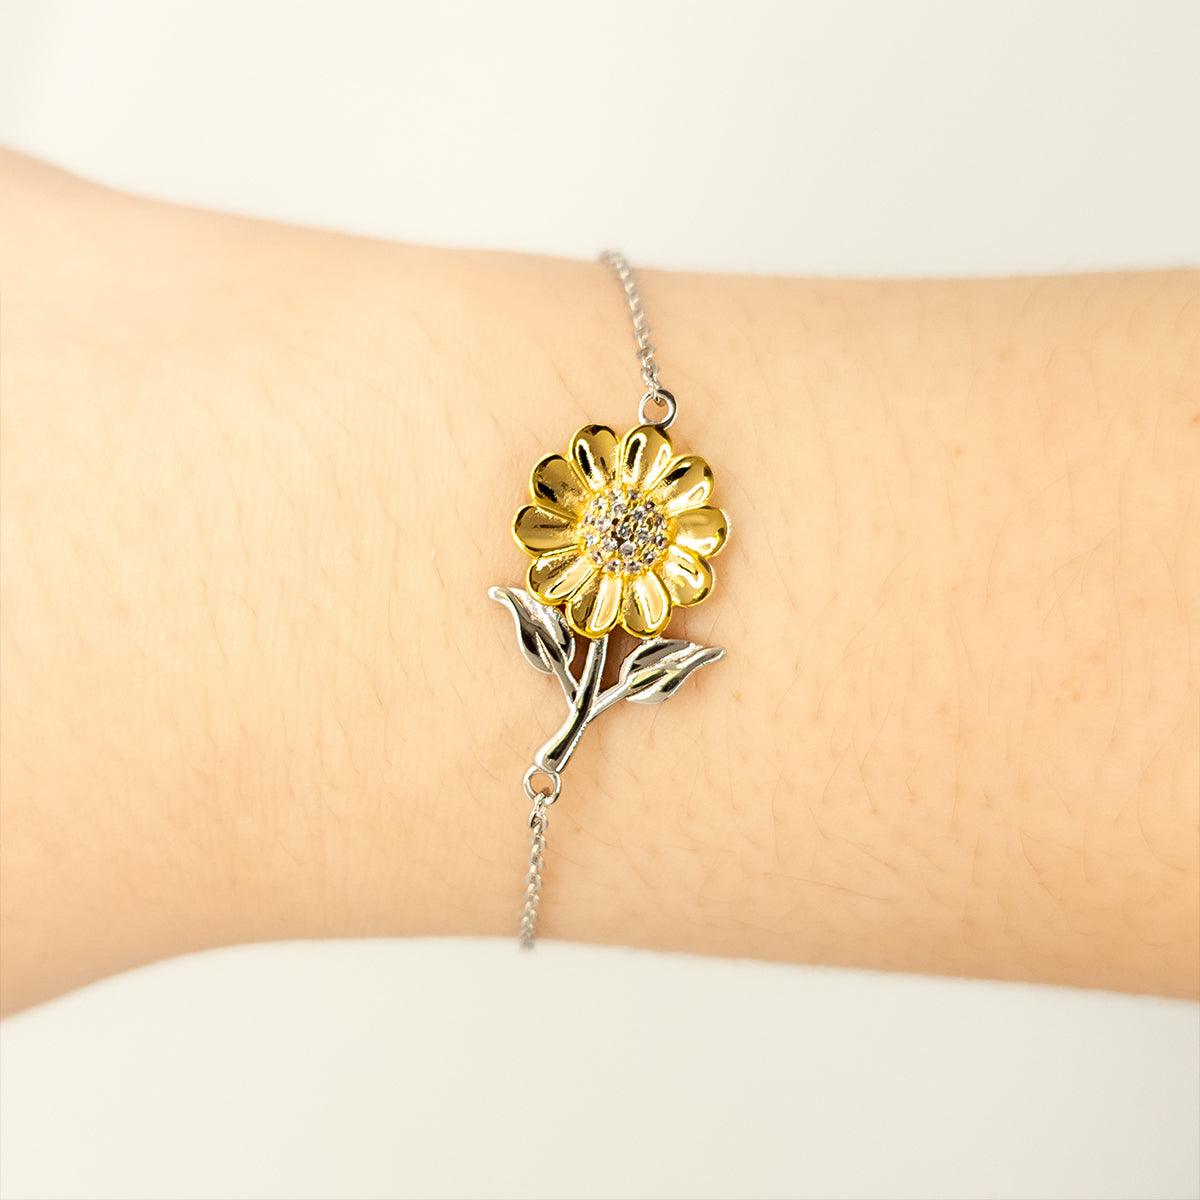 Husband Gifts, To My Husband Remember, you will never lose. You will either WIN or LEARN, Keepsake Sunflower Bracelet For Husband Card, Birthday Christmas Gifts Ideas For Husband X-mas Gifts - Mallard Moon Gift Shop